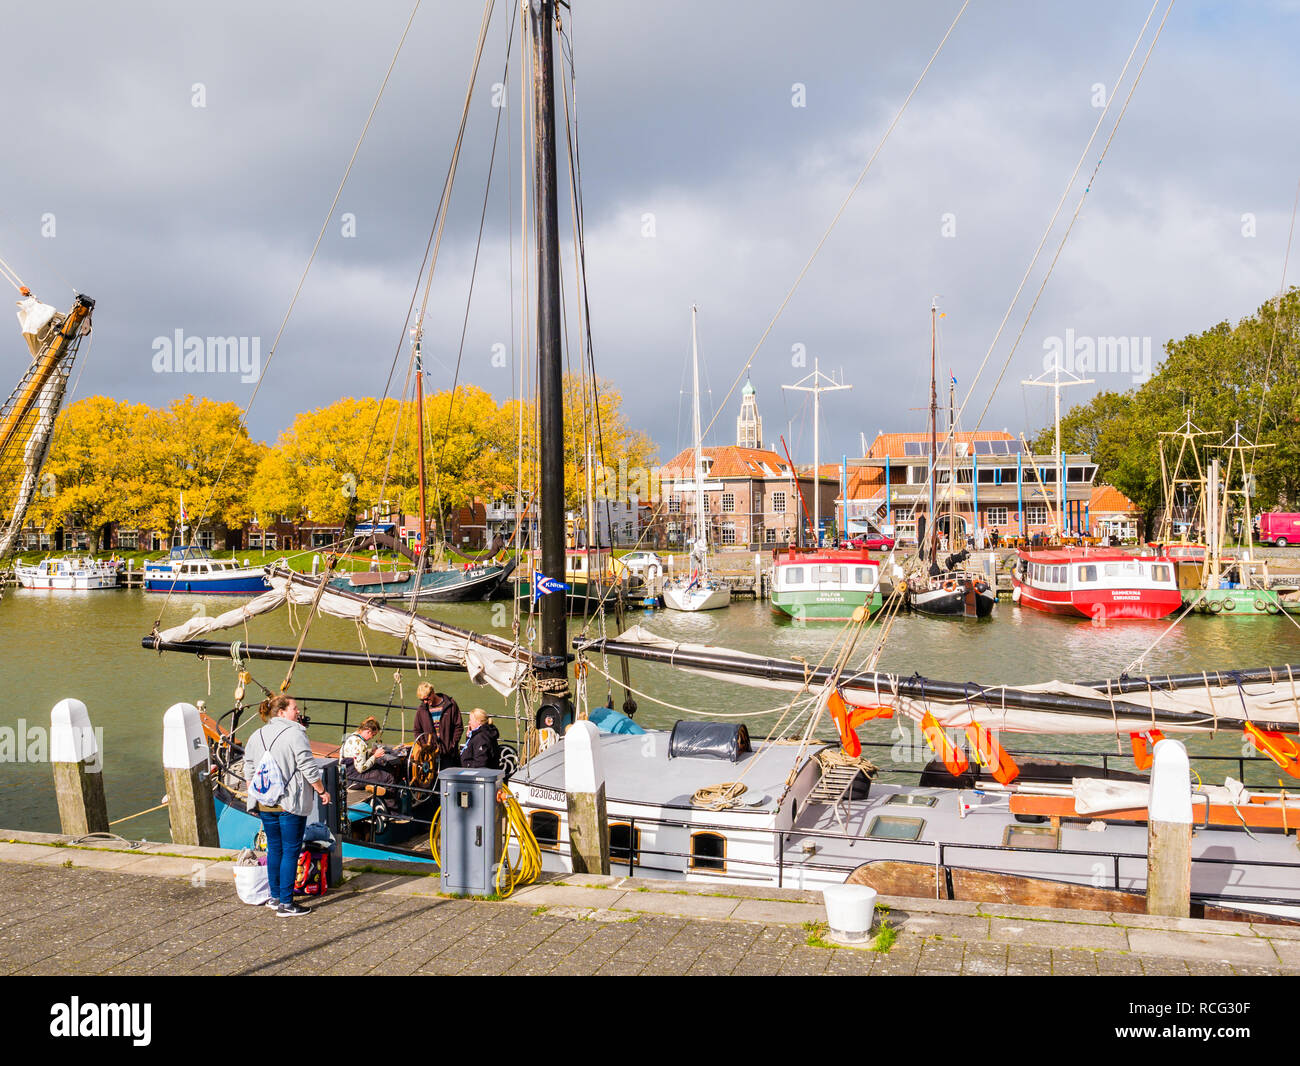 People and traditional sailboat in outer harbour of historic town of Enkhuizen, Noord-Holland, Netherlands Stock Photo